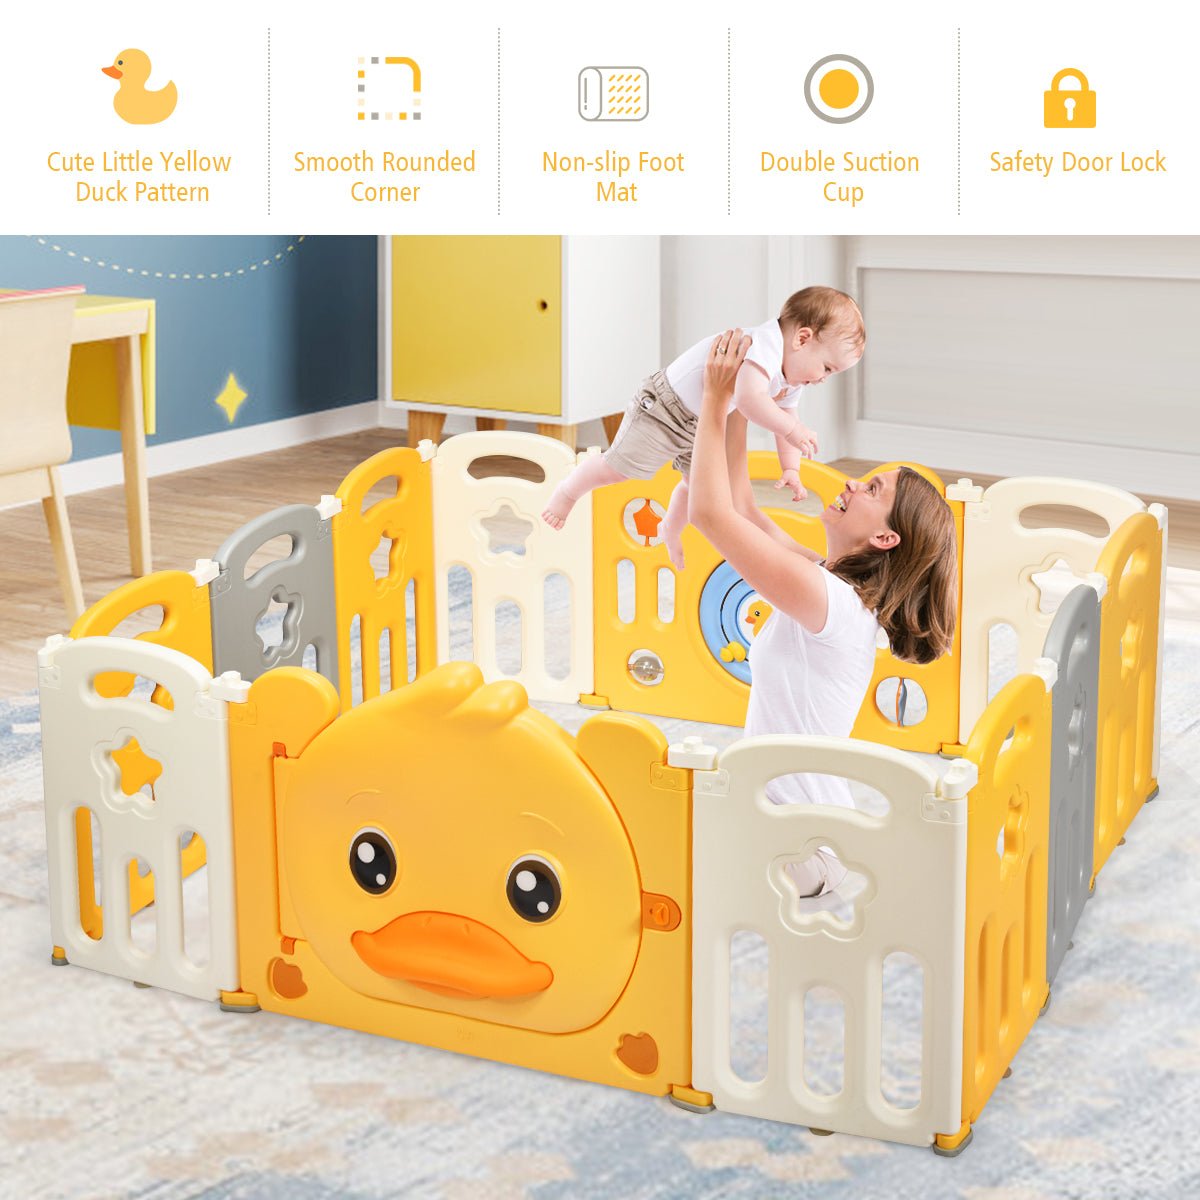 Spacious Baby Play Area with Non-slip Rubber Mats